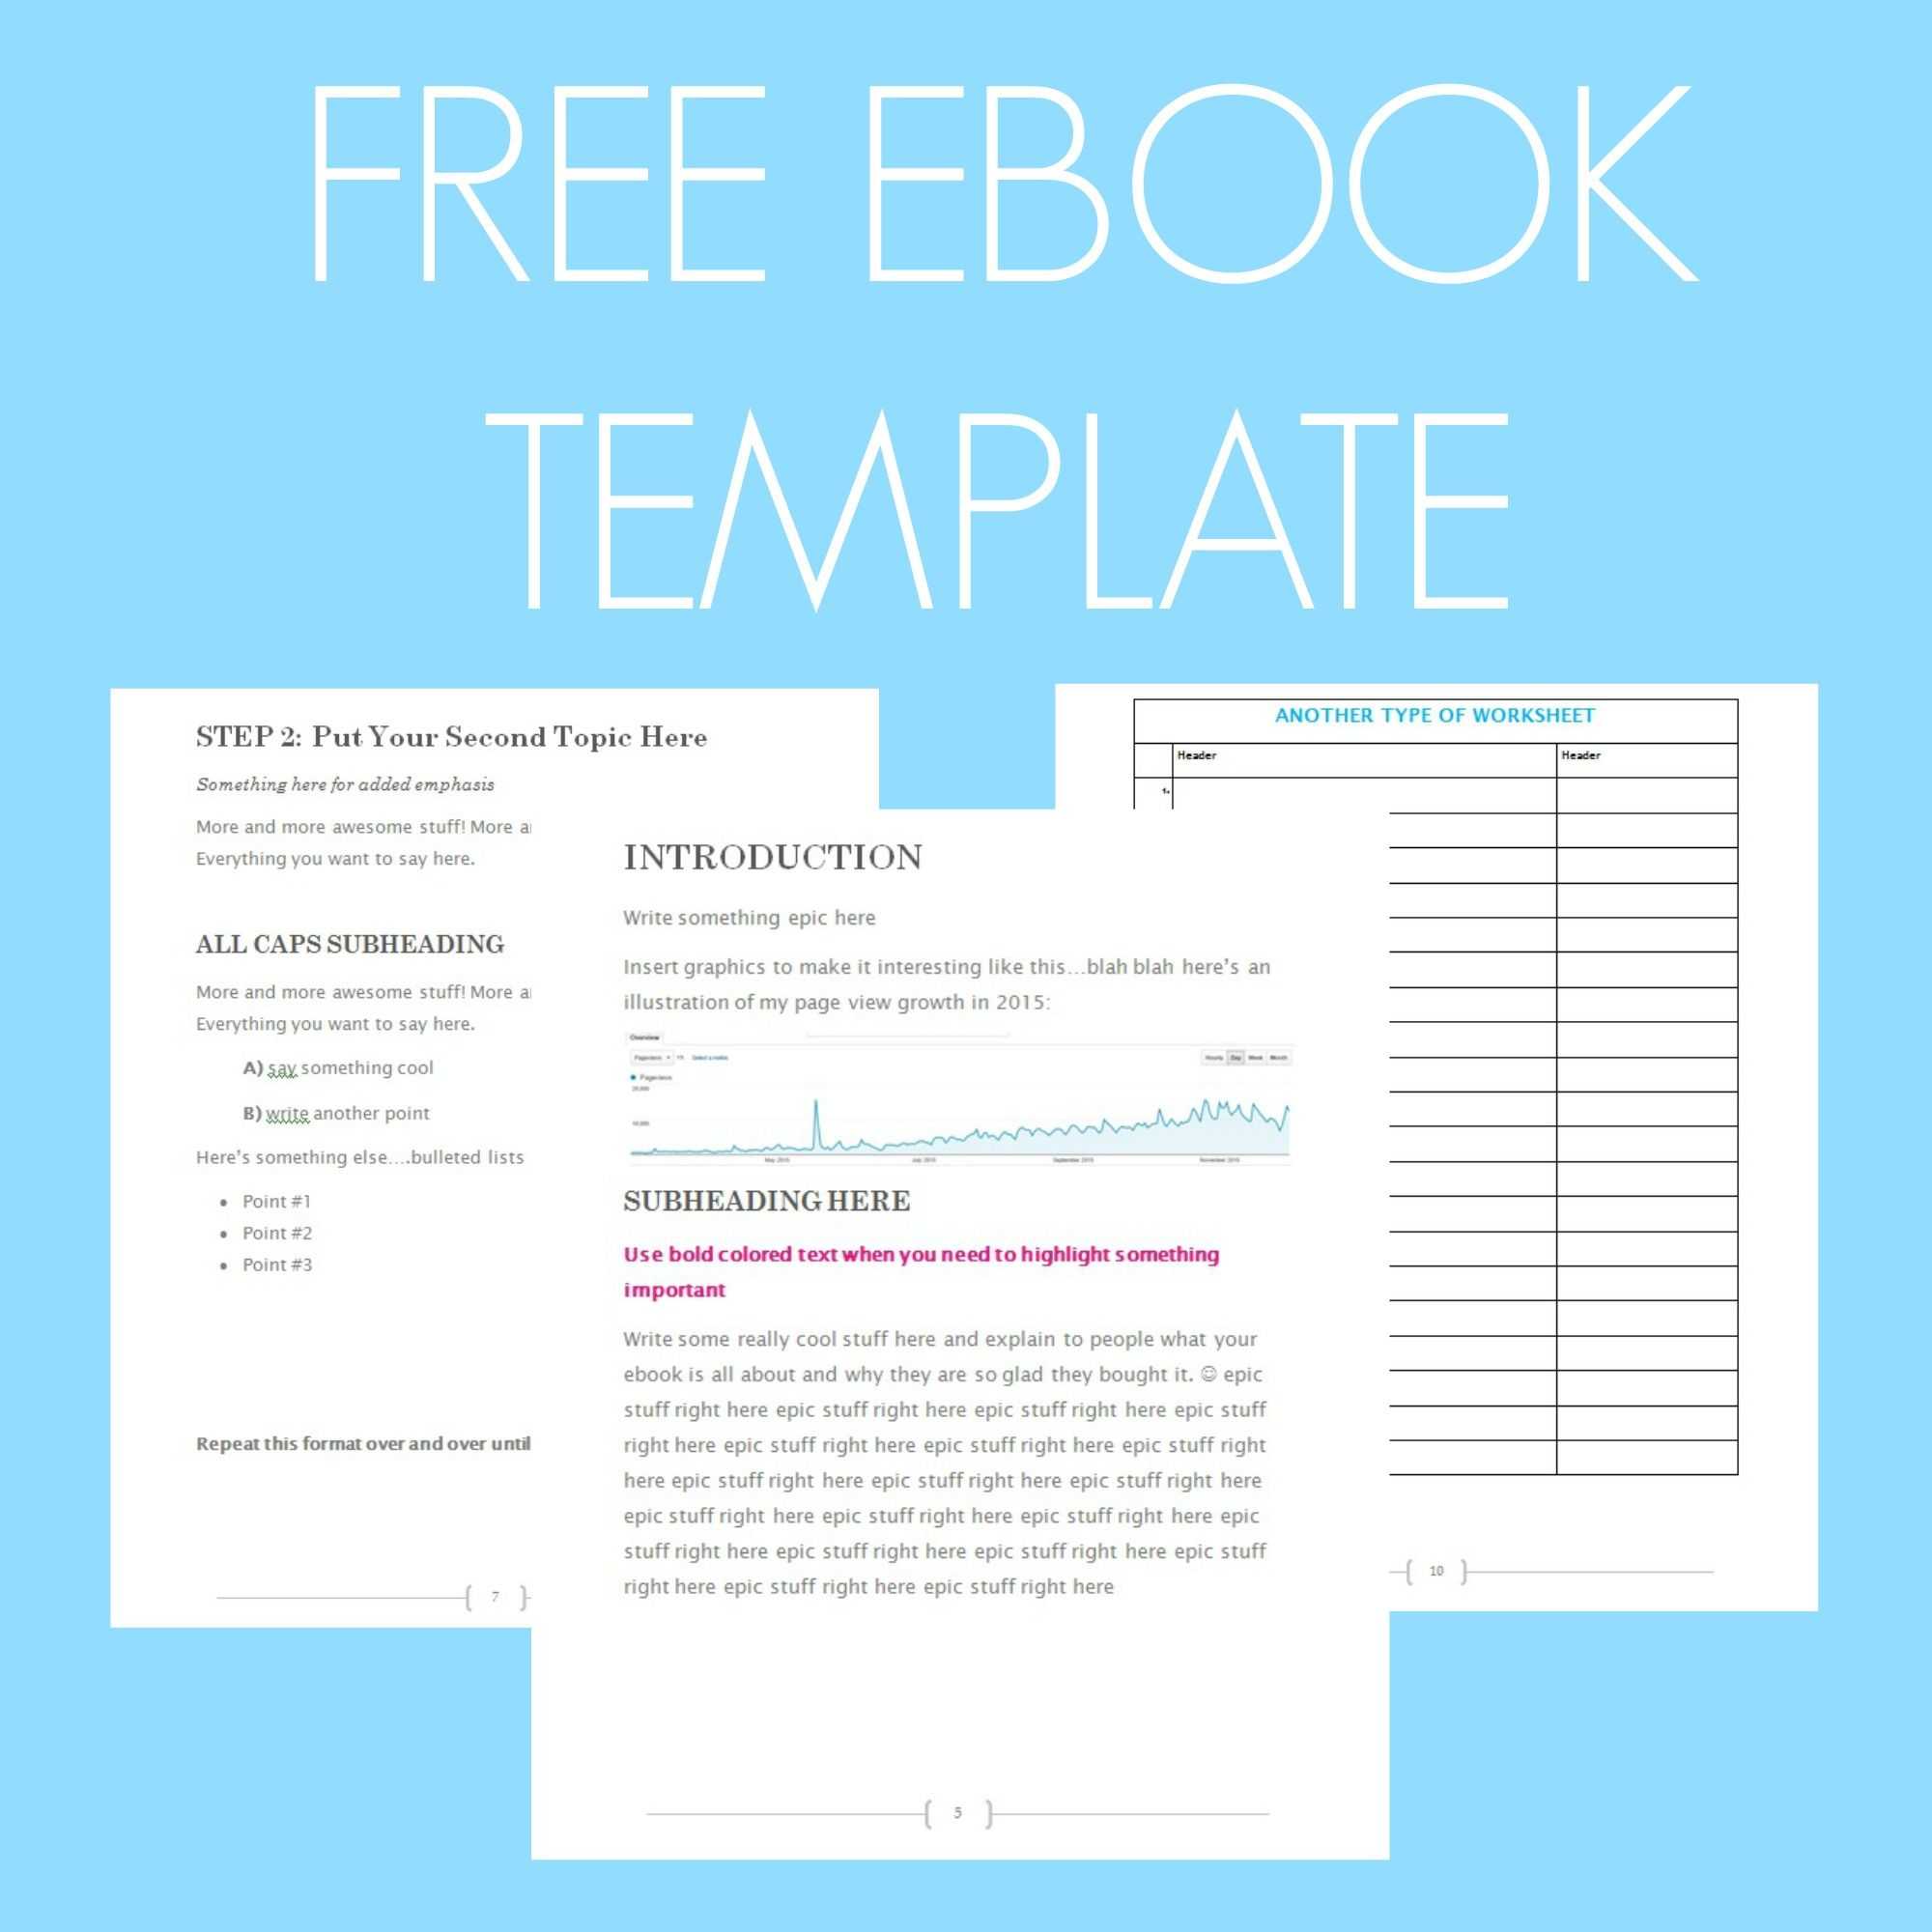 Free Ebook Template – Preformatted Word Document | Free For Microsoft Word Table Of Contents Template